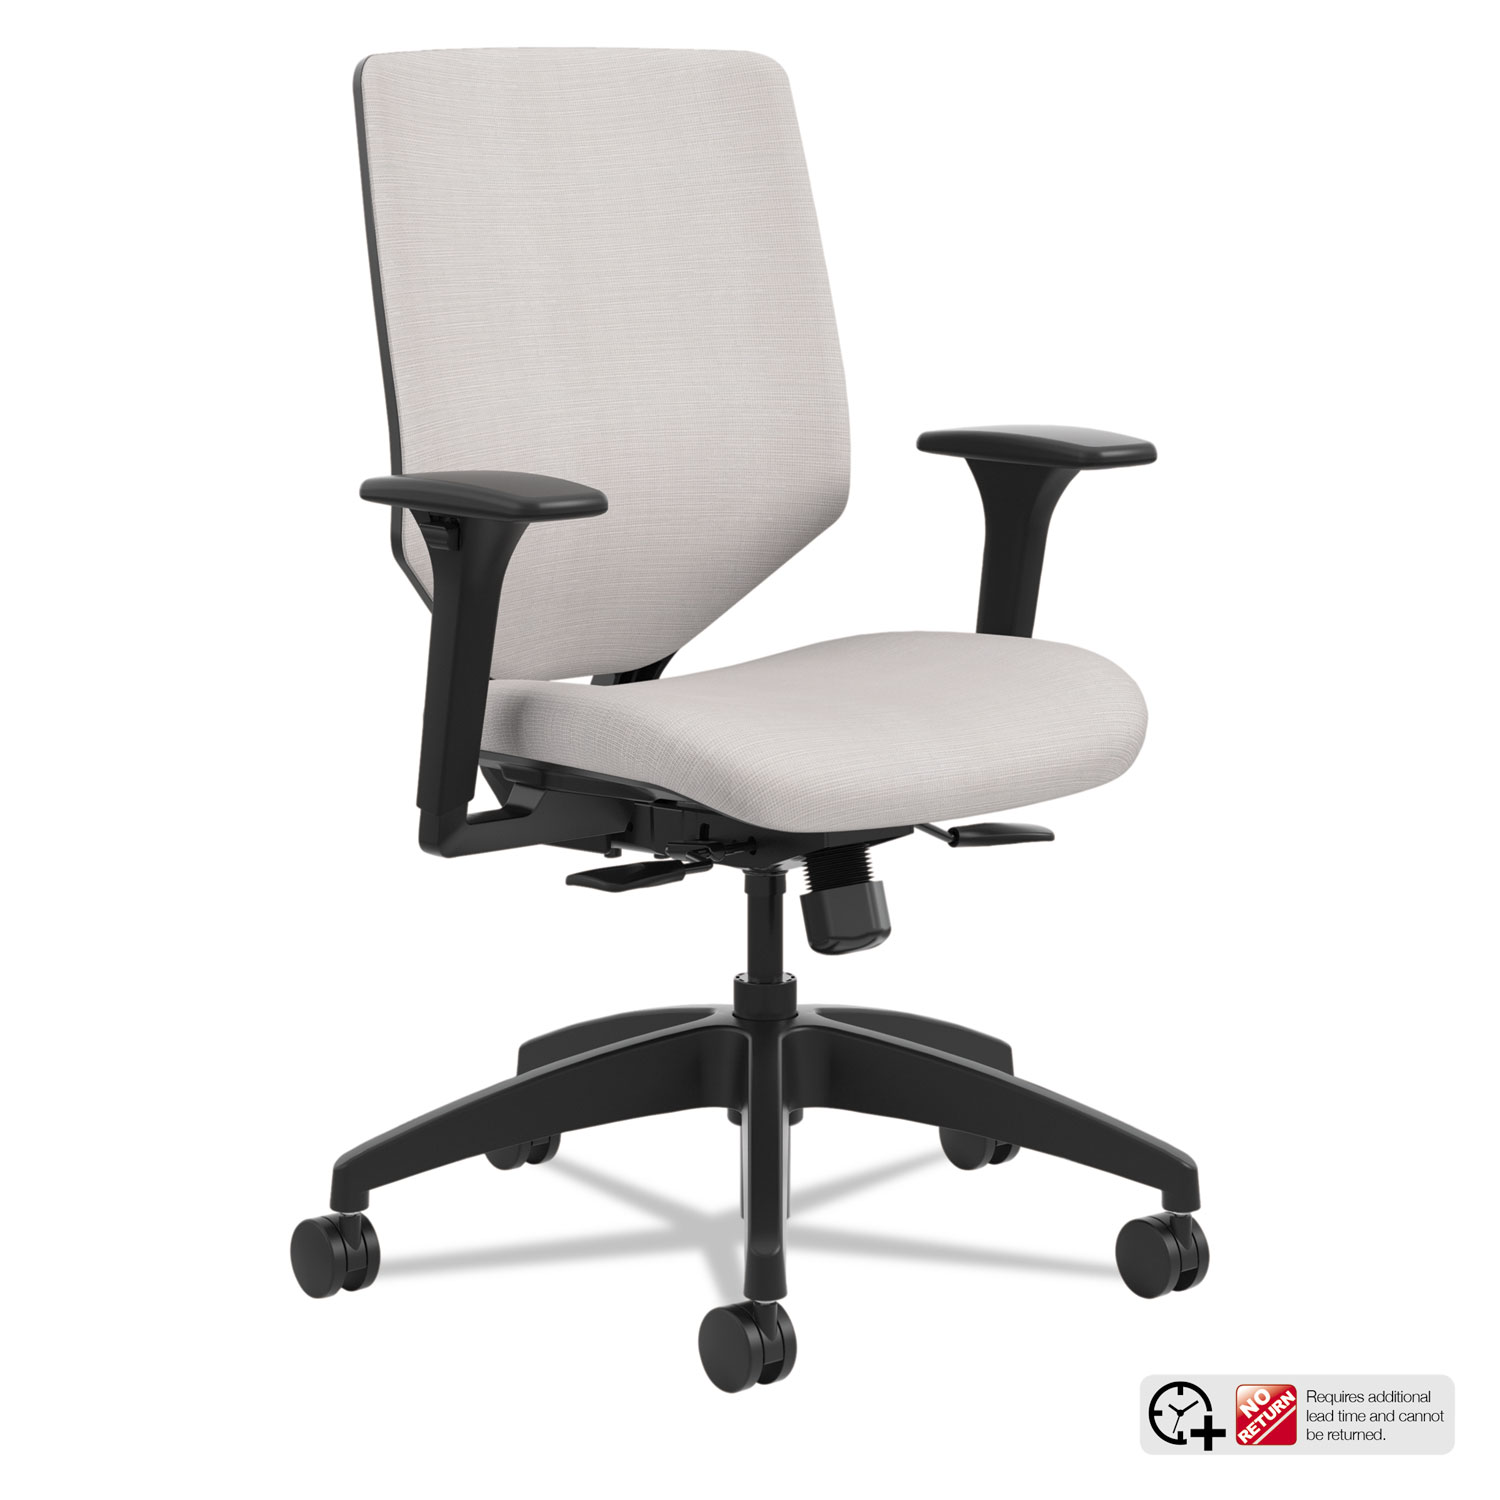  HON SVU1ACLC19TK Solve Series Upholstered Back Task Chair, Supports up to 300 lbs., Sterling Seat/Sterling Back, Black Base (HONSVU1ACLC19TK) 